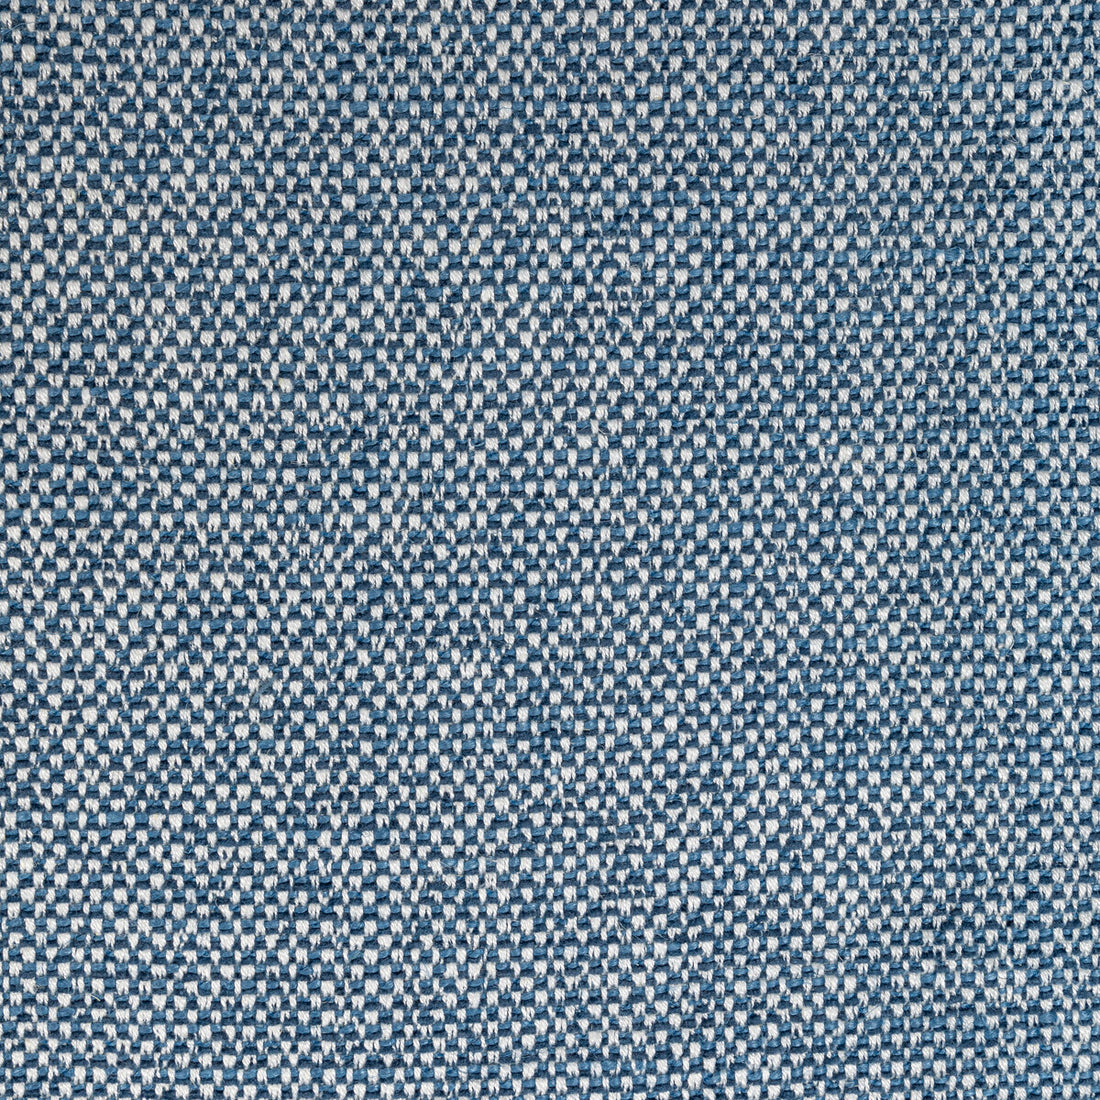 Edern Plain fabric in blue color - pattern 8022109.5.0 - by Brunschwig &amp; Fils in the Lorient Weaves collection